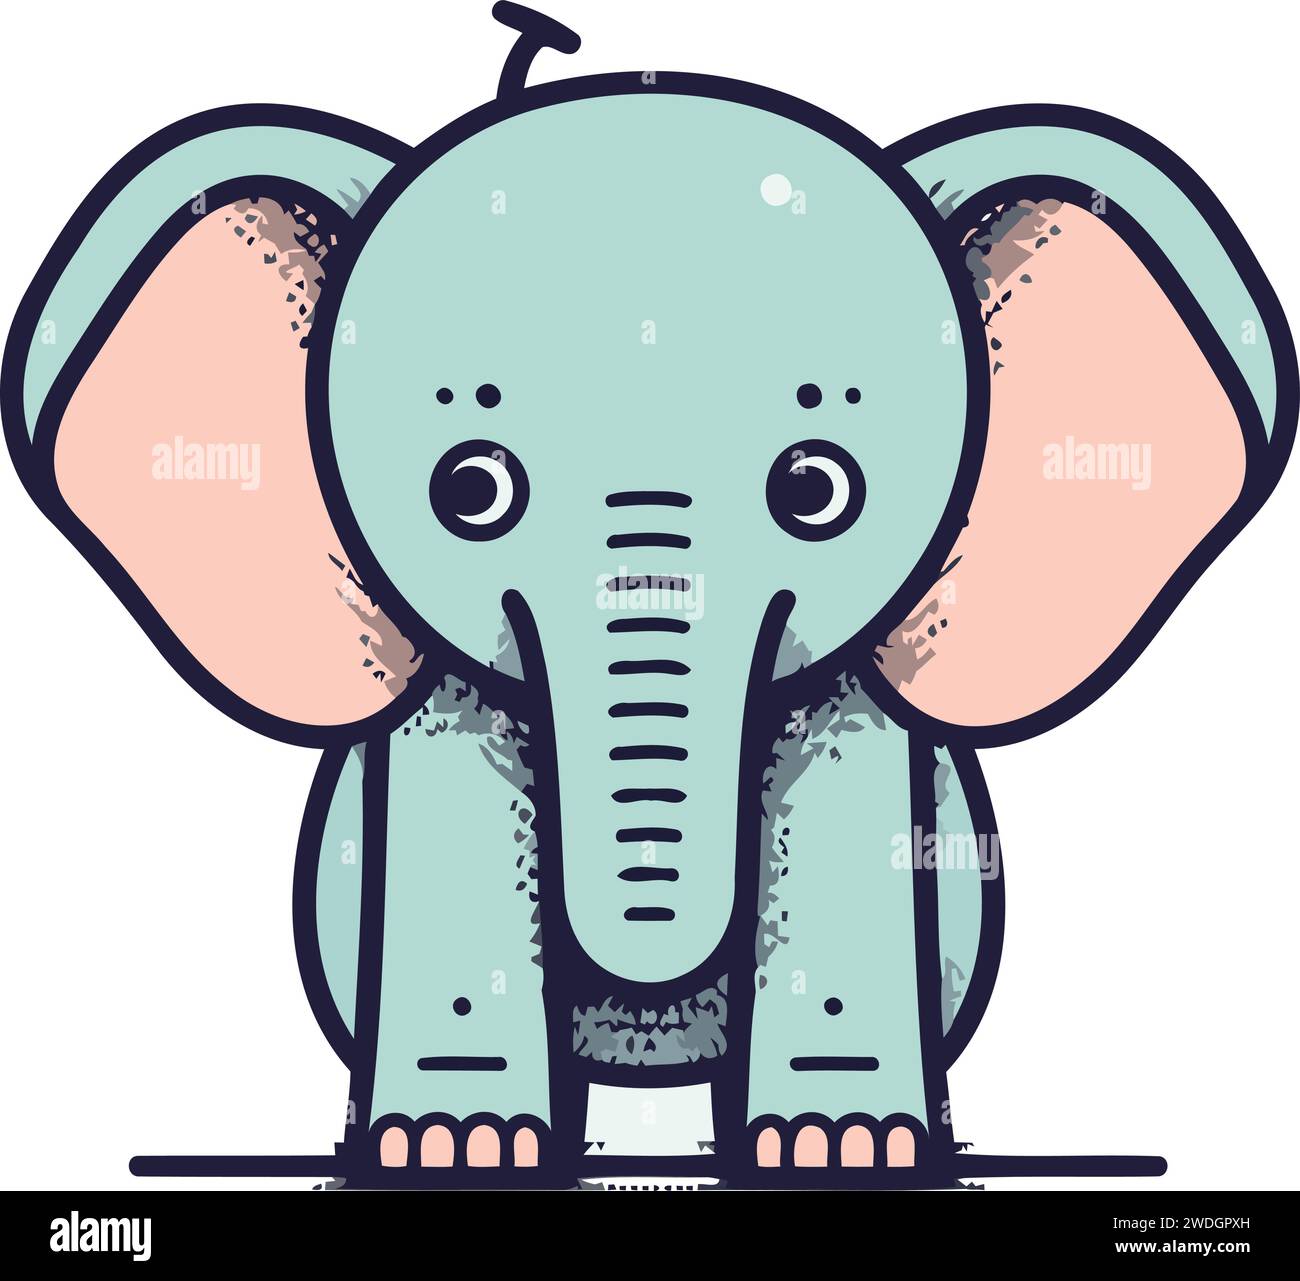 Cute elephant. Vector illustration. Isolated on white background. Stock Vector